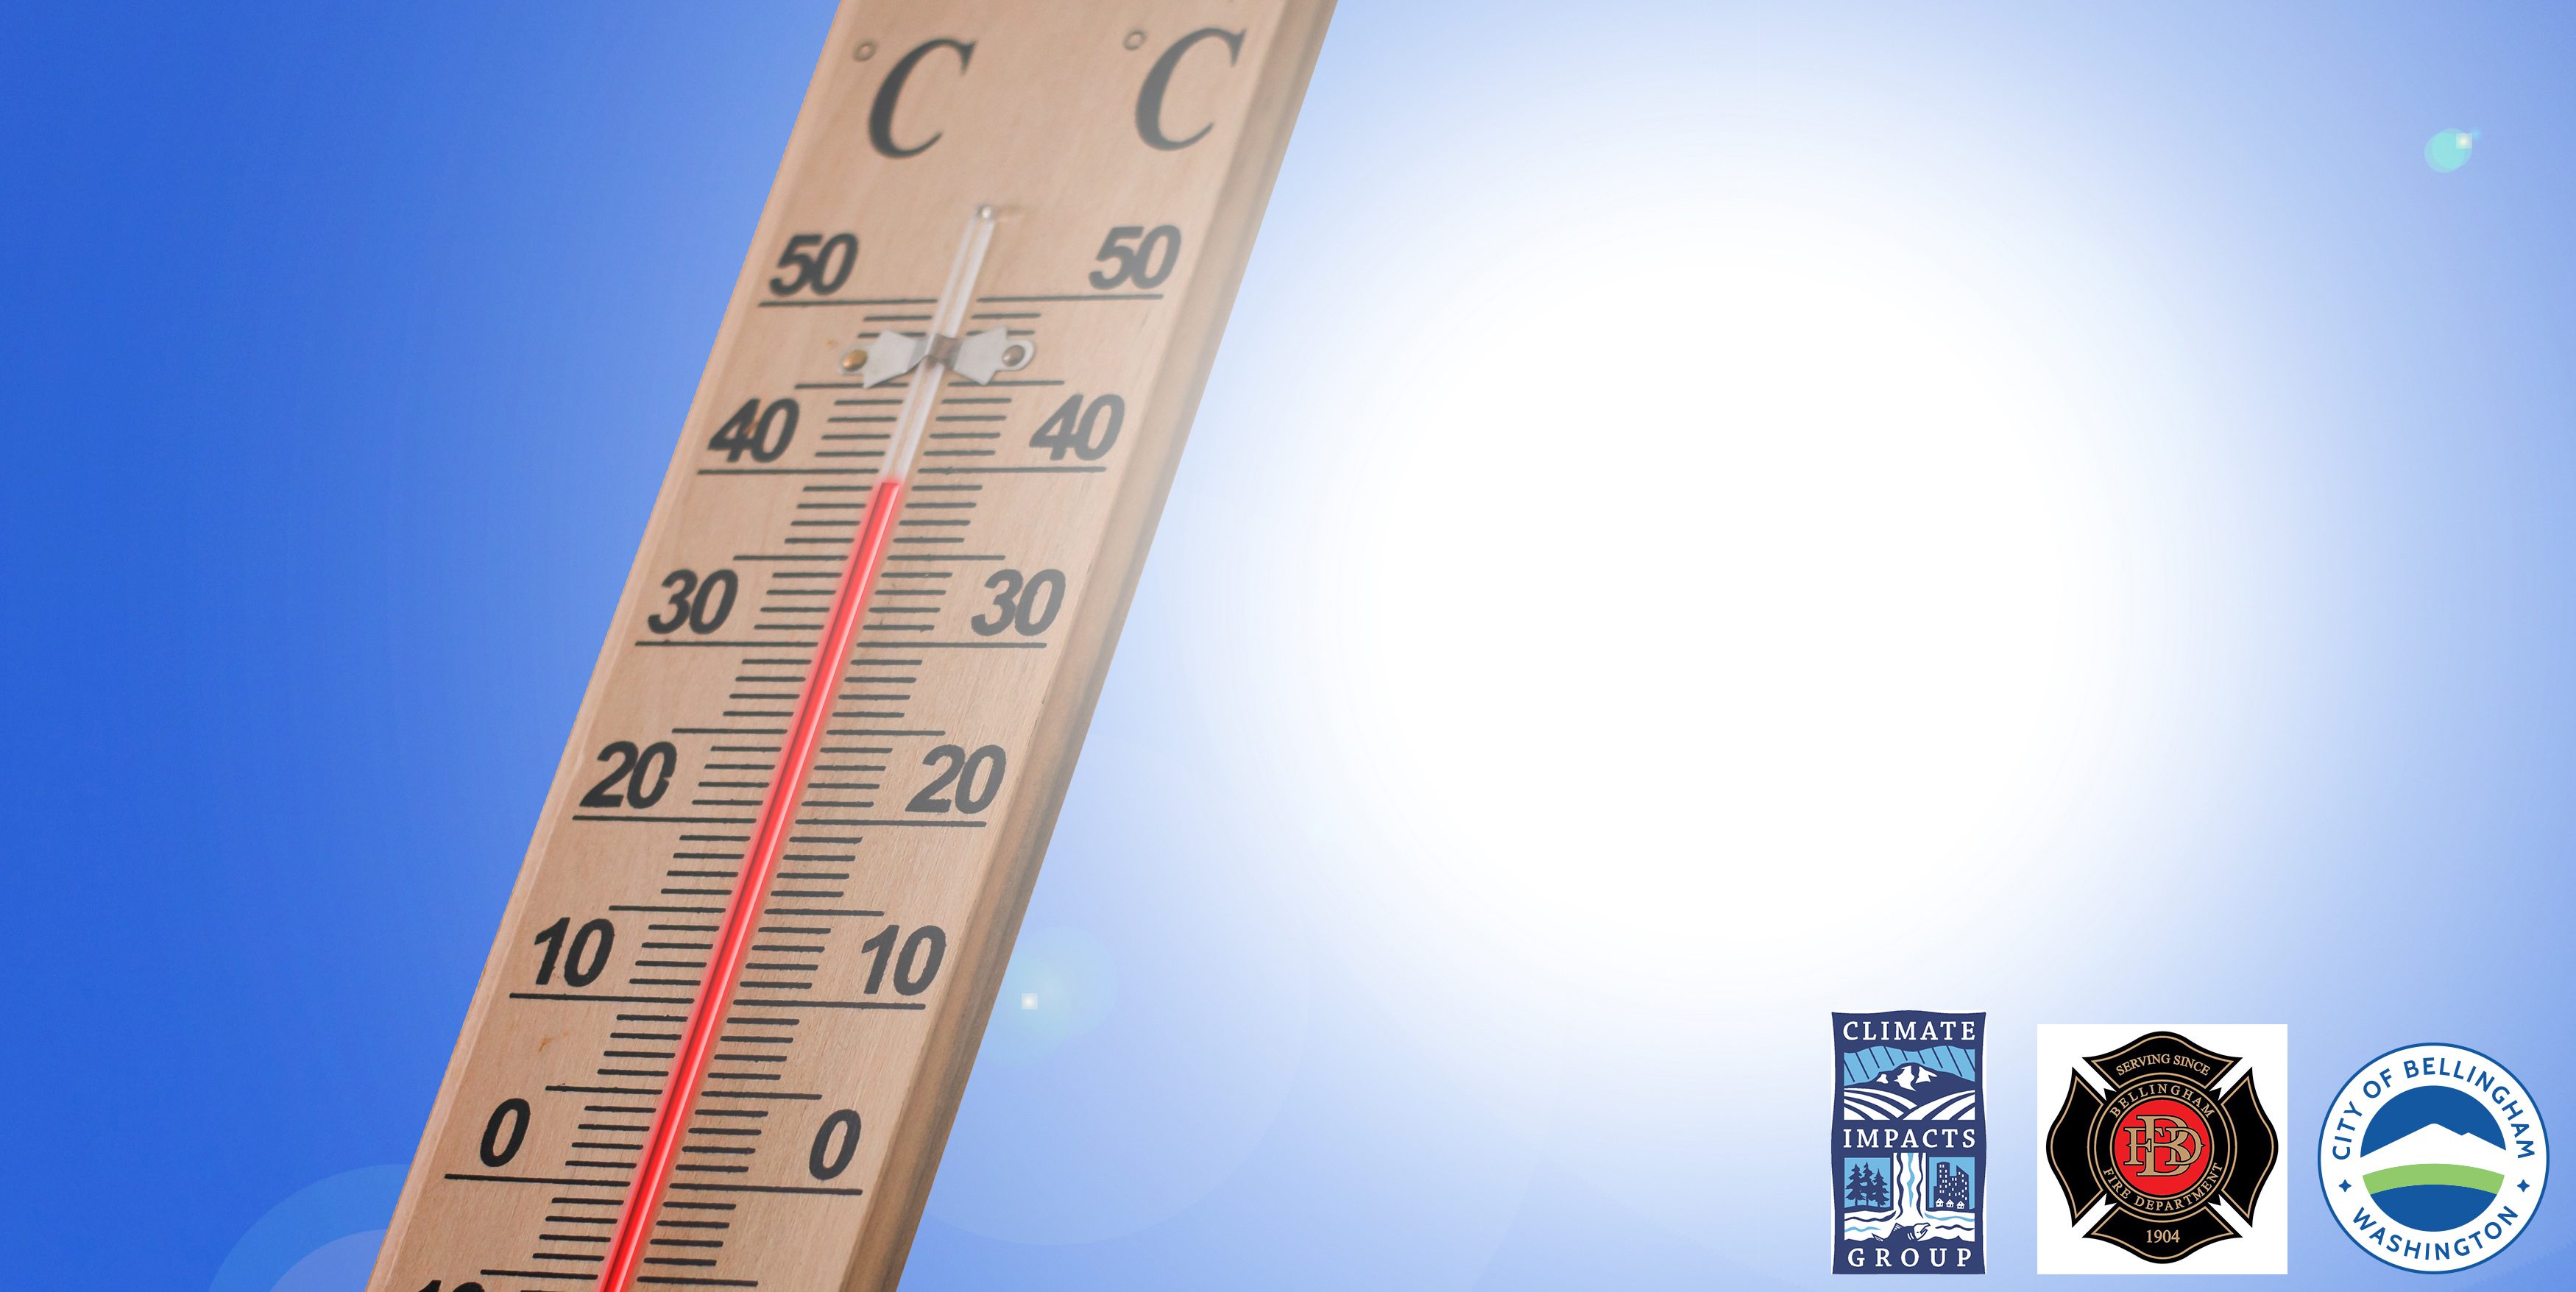 Photo of thermometer showing high temperature with sunshine in background. Logos for Climate Impacts Group, Bellingham Fire District, and the City of Bellingham in the lower left corner.